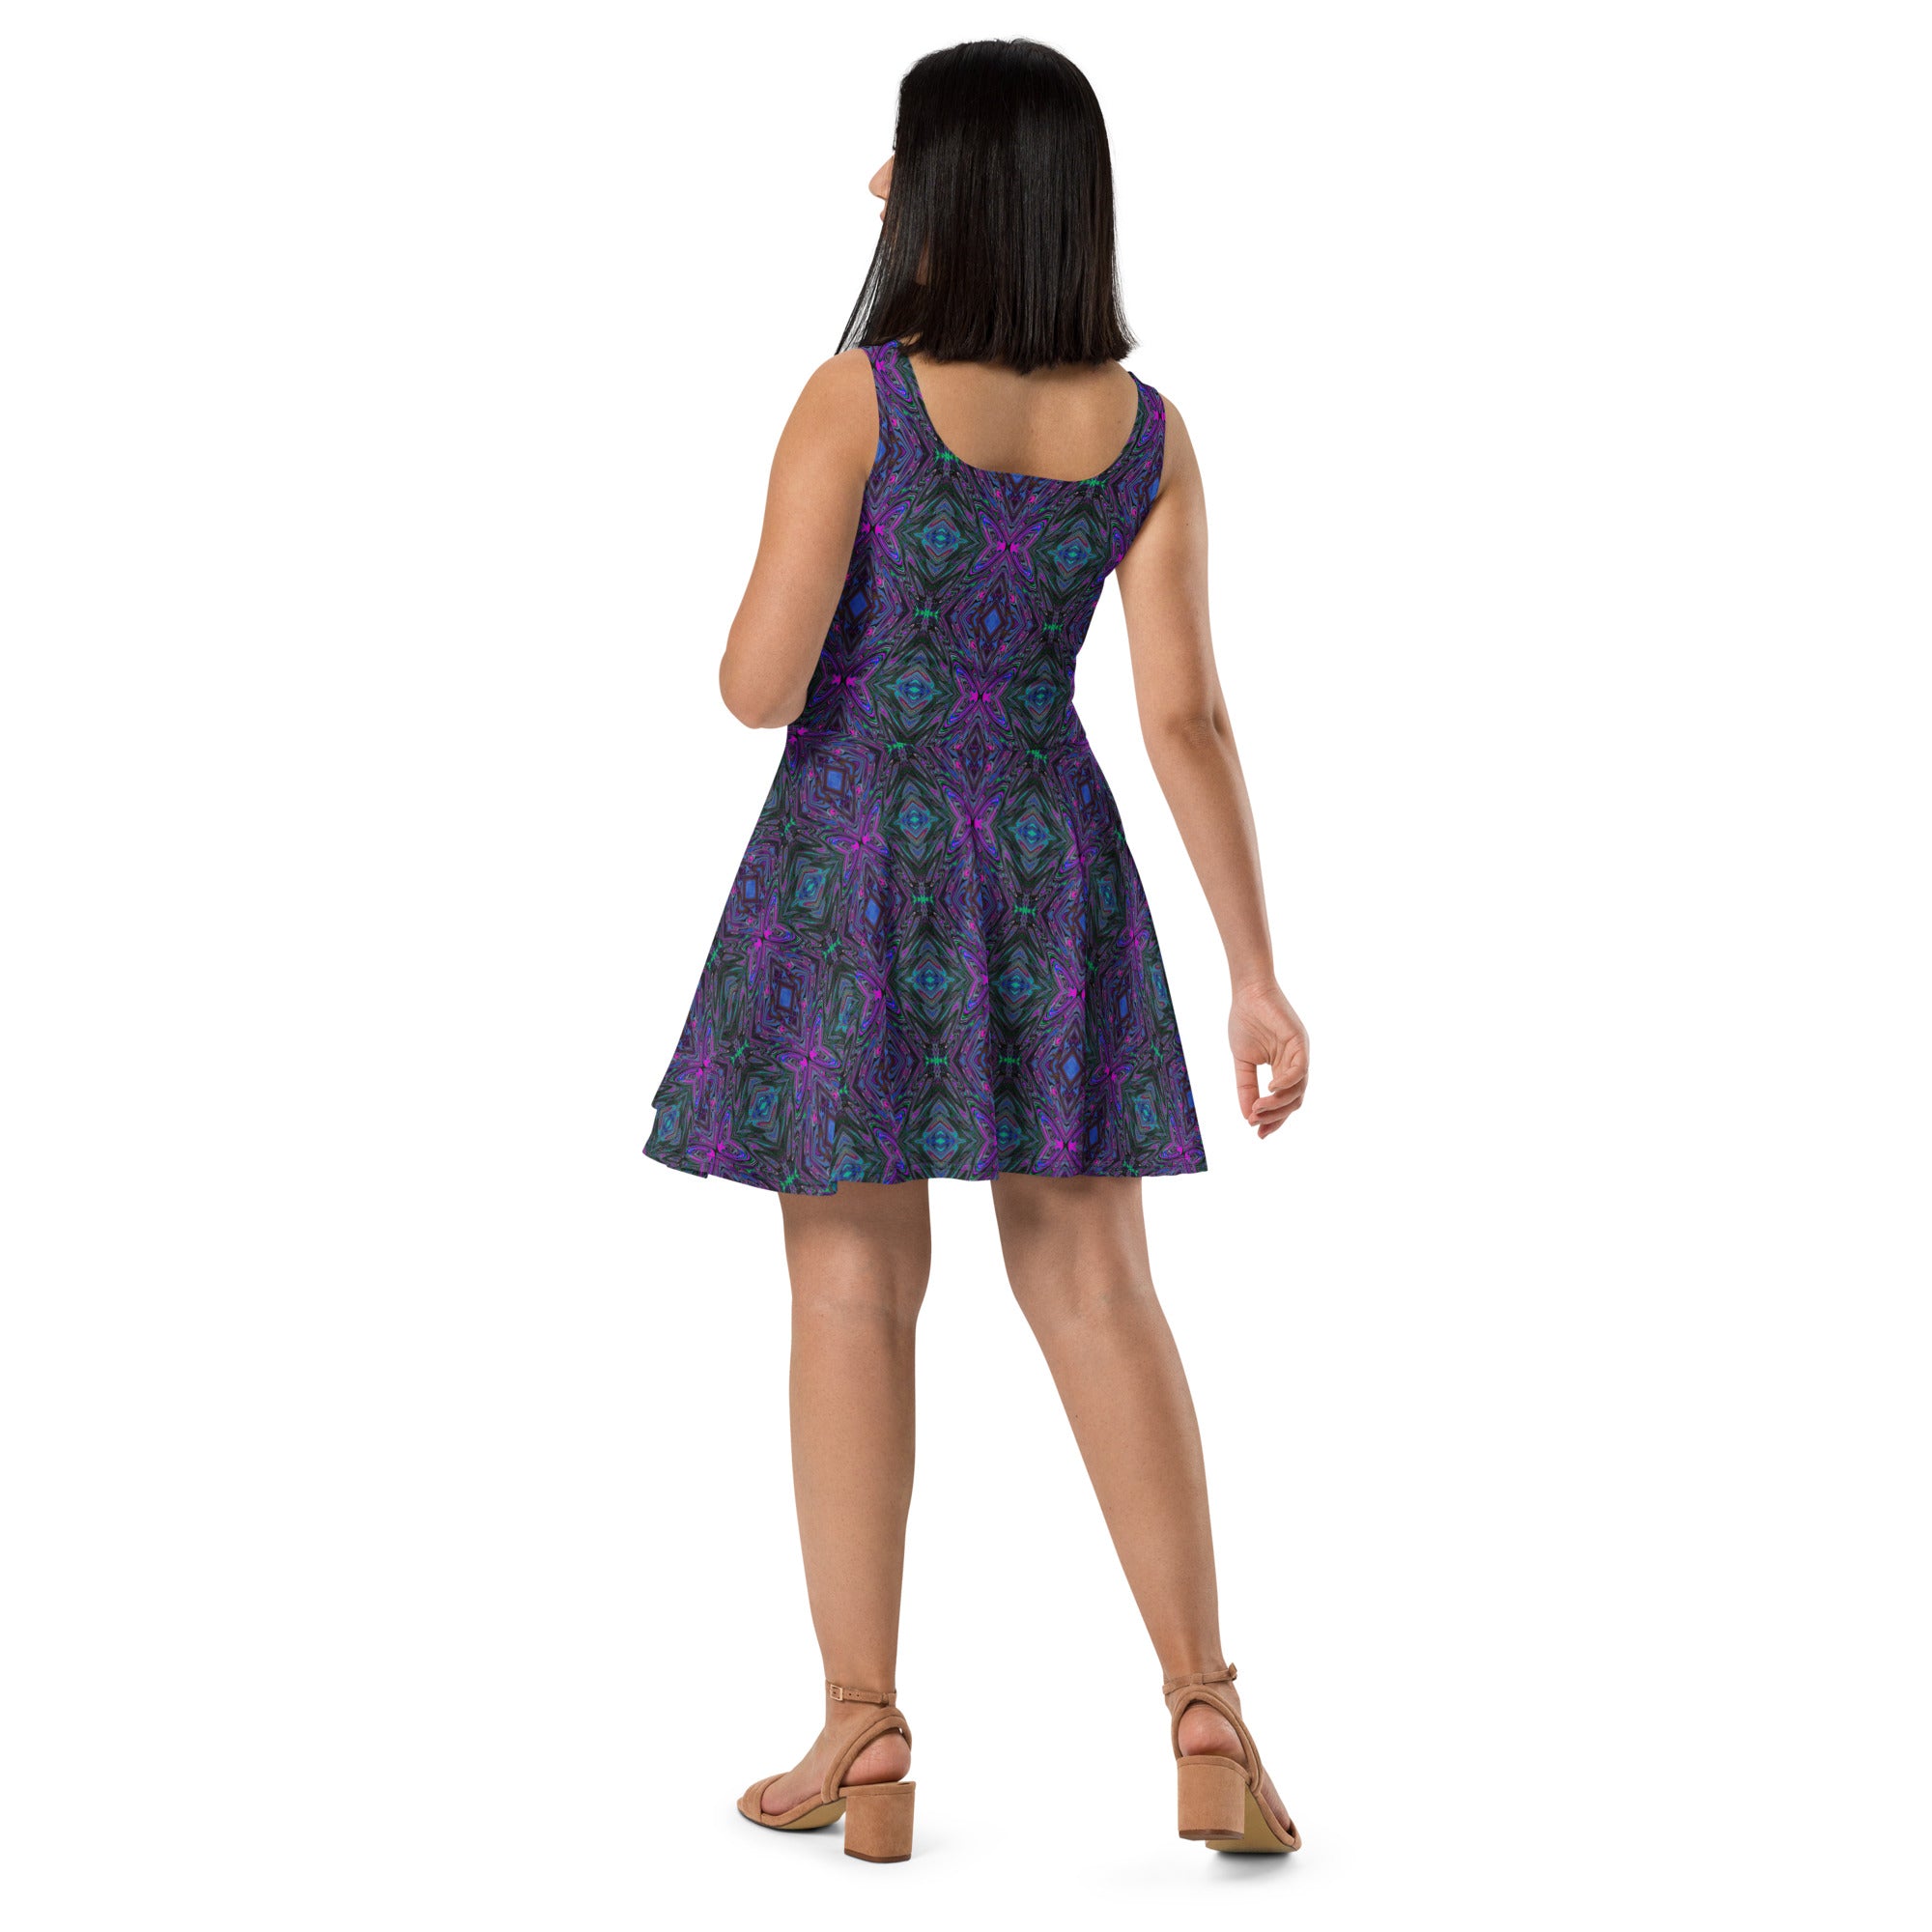 Flared Skater Dress - Trippy Magenta, Blue and Green Abstract Butterfly